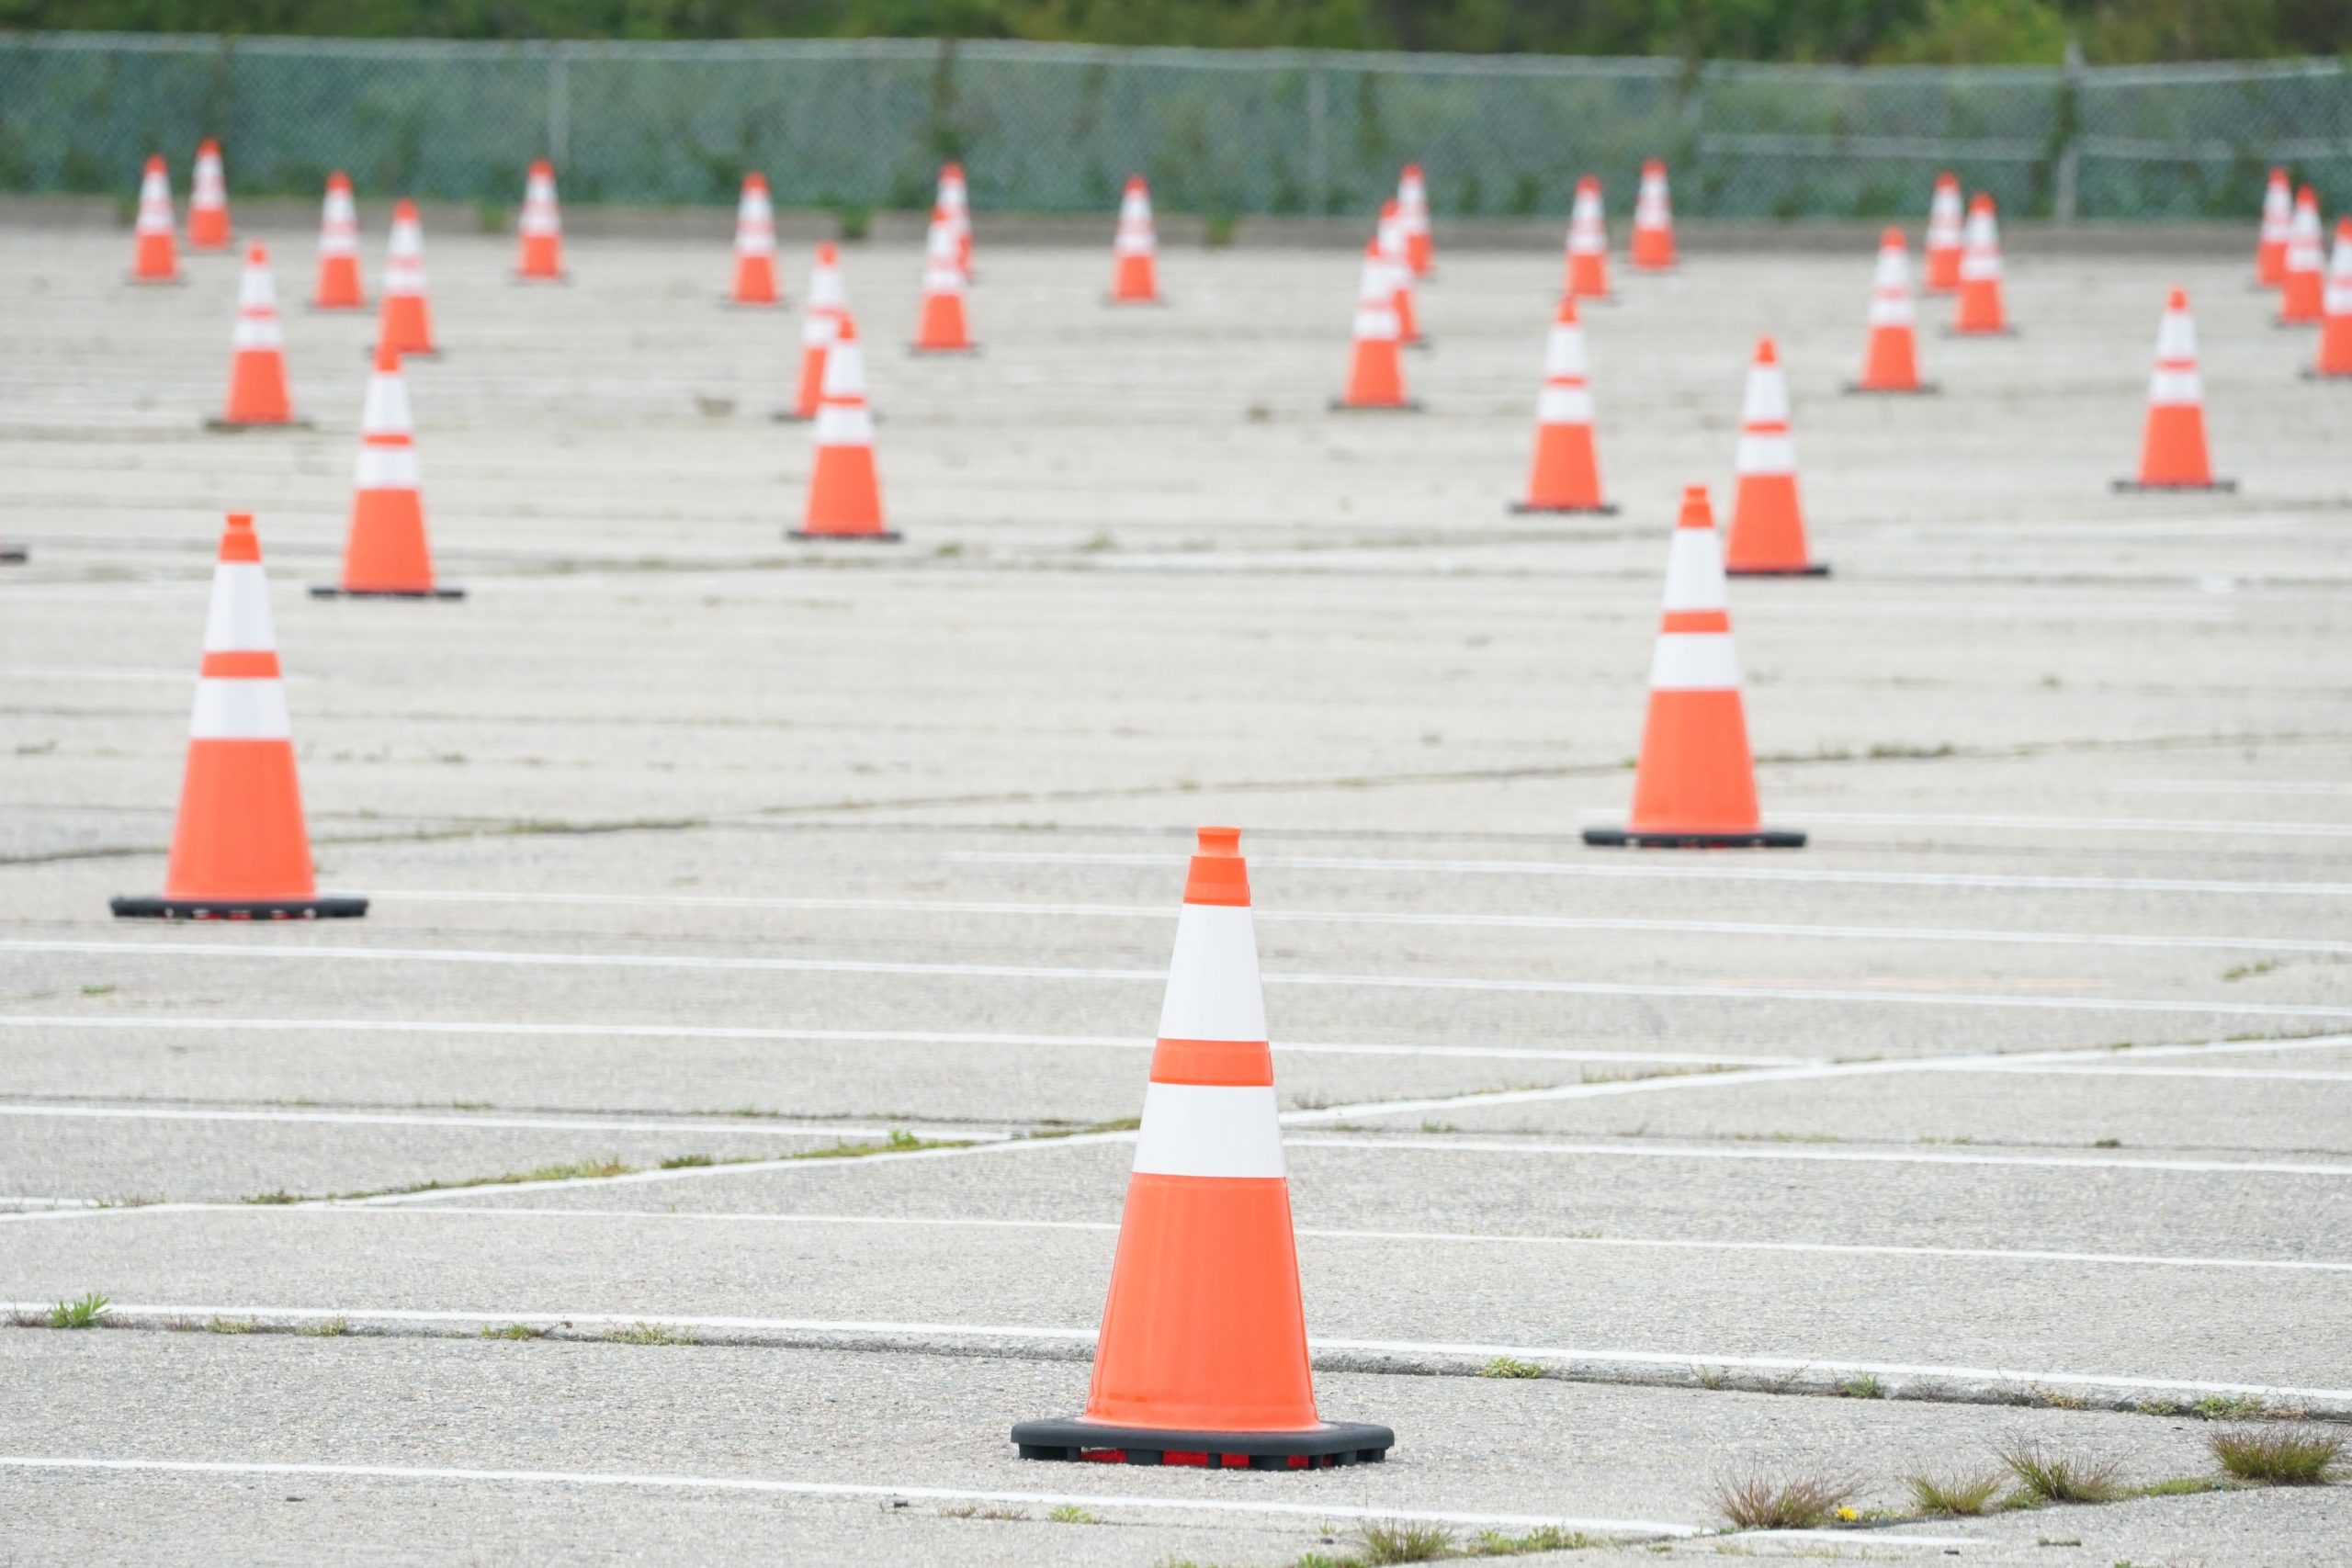 Cones Scattered Throughout Empty Parking Lot